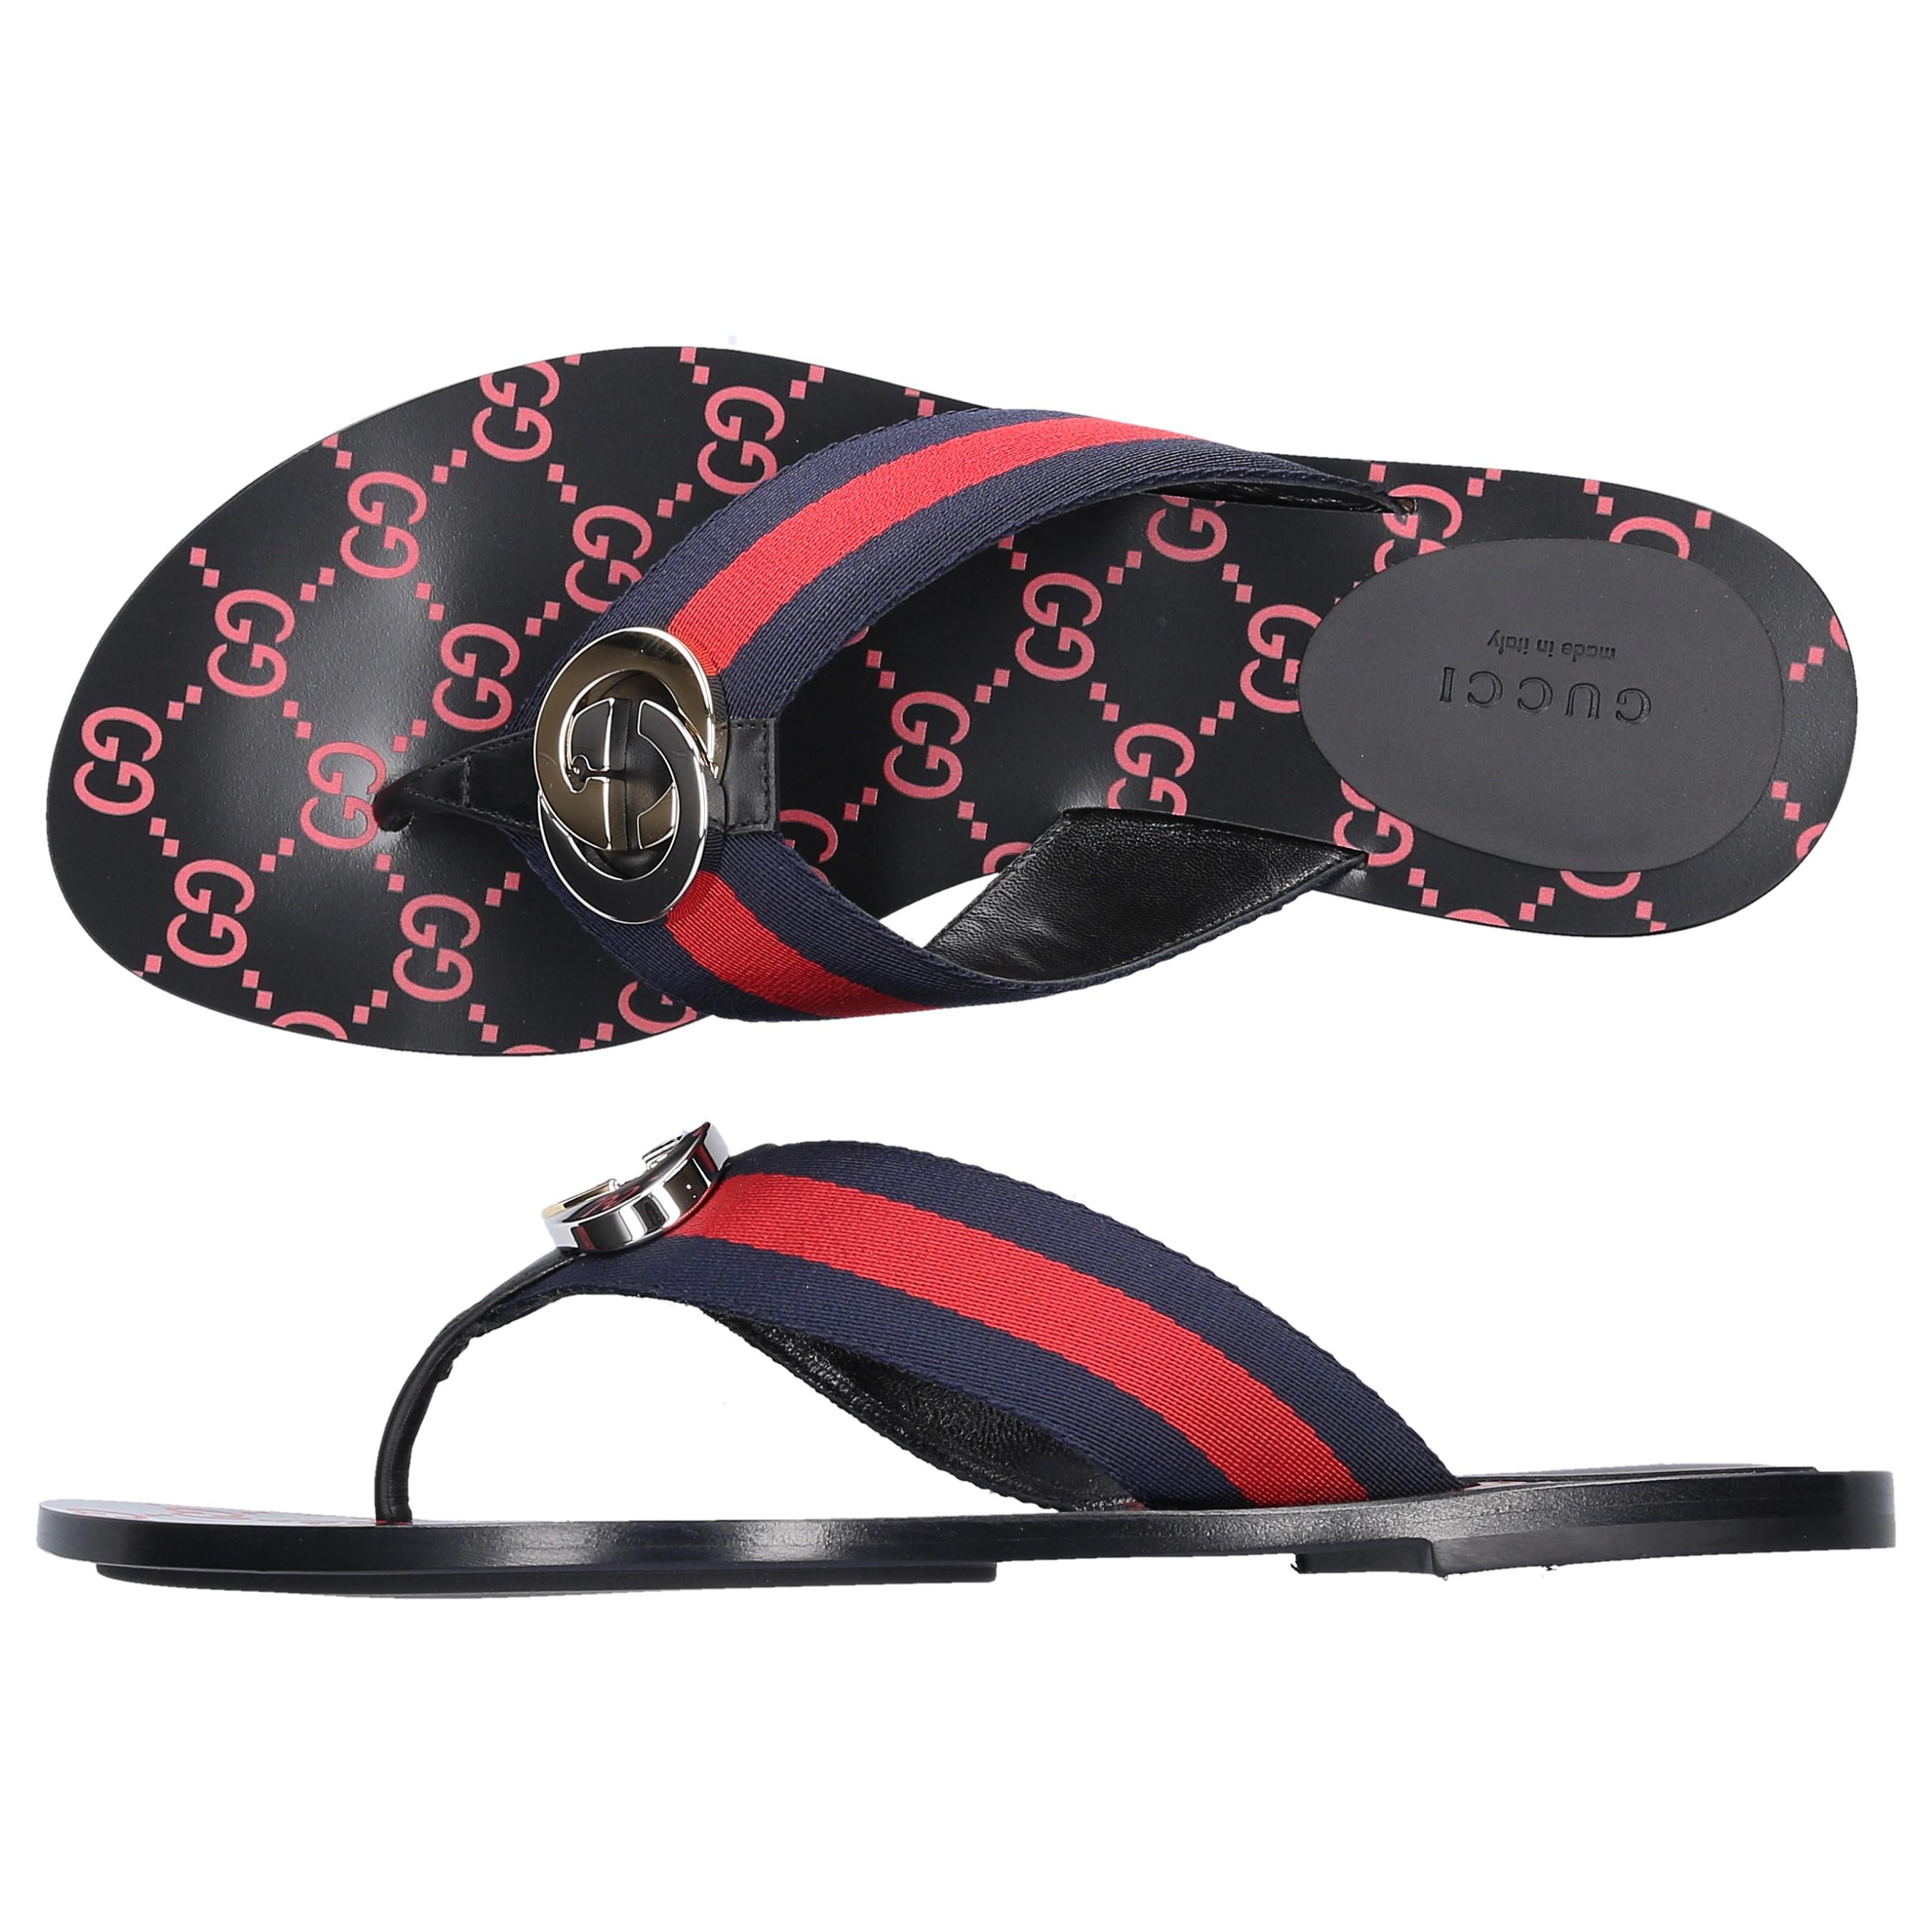 Gucci Cotton Flip Flops in Blue/Red (Blue) Save - Lyst